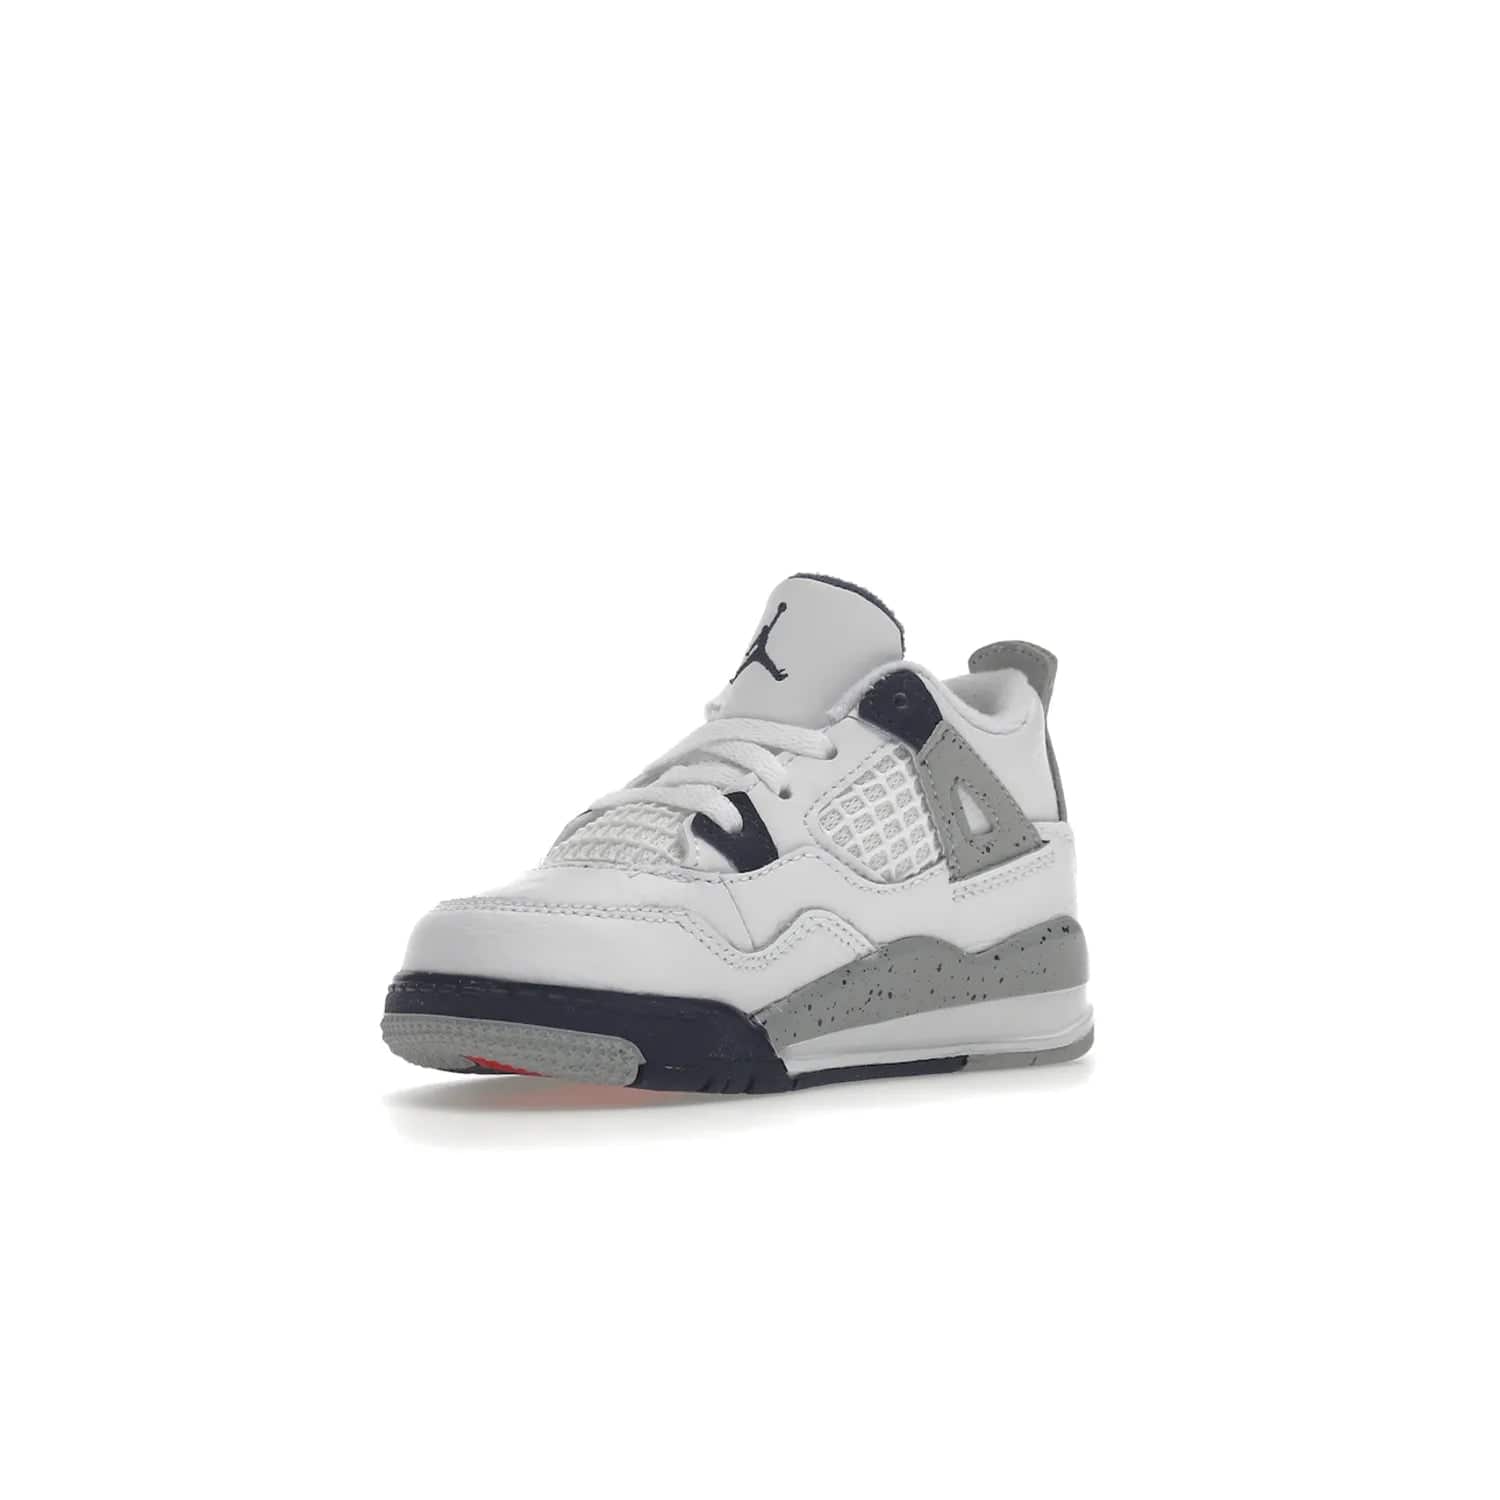 Jordan 4 Retro Midnight Navy (TD) - Image 15 - Only at www.BallersClubKickz.com - Introducing the Jordan 4 Retro Midnight Navy (TD) for kids. White leather upper with navy and grey accents plus fire red detailing. Perfect for everyday wear. Get yours before they sell out.